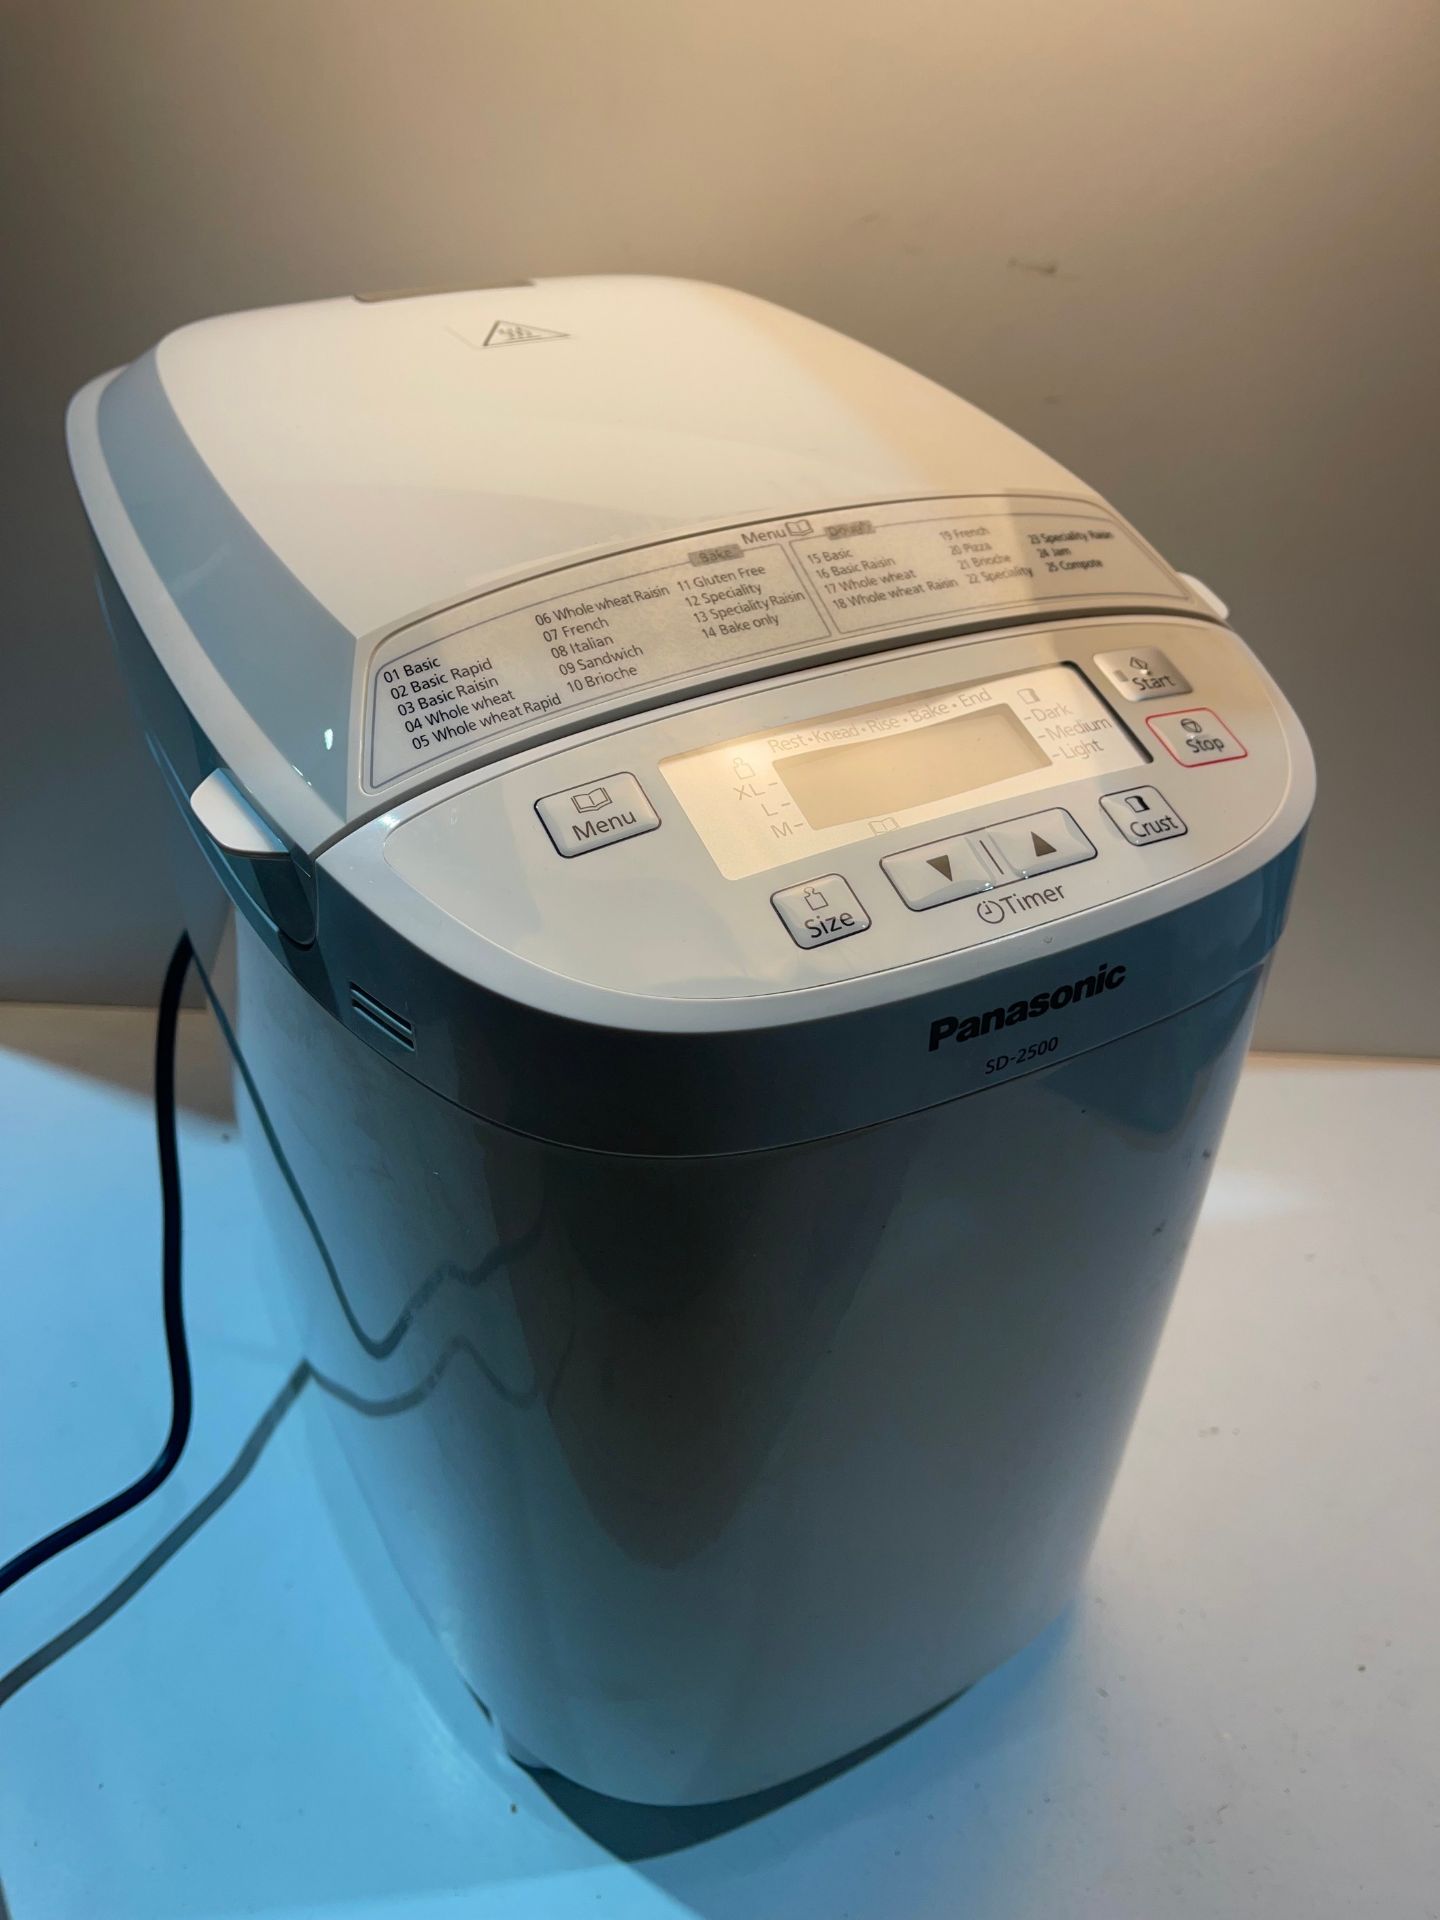 Panasonic SD-2500WXC Compact Breadmaker with Gluten Free Programme, White £100.82Condition